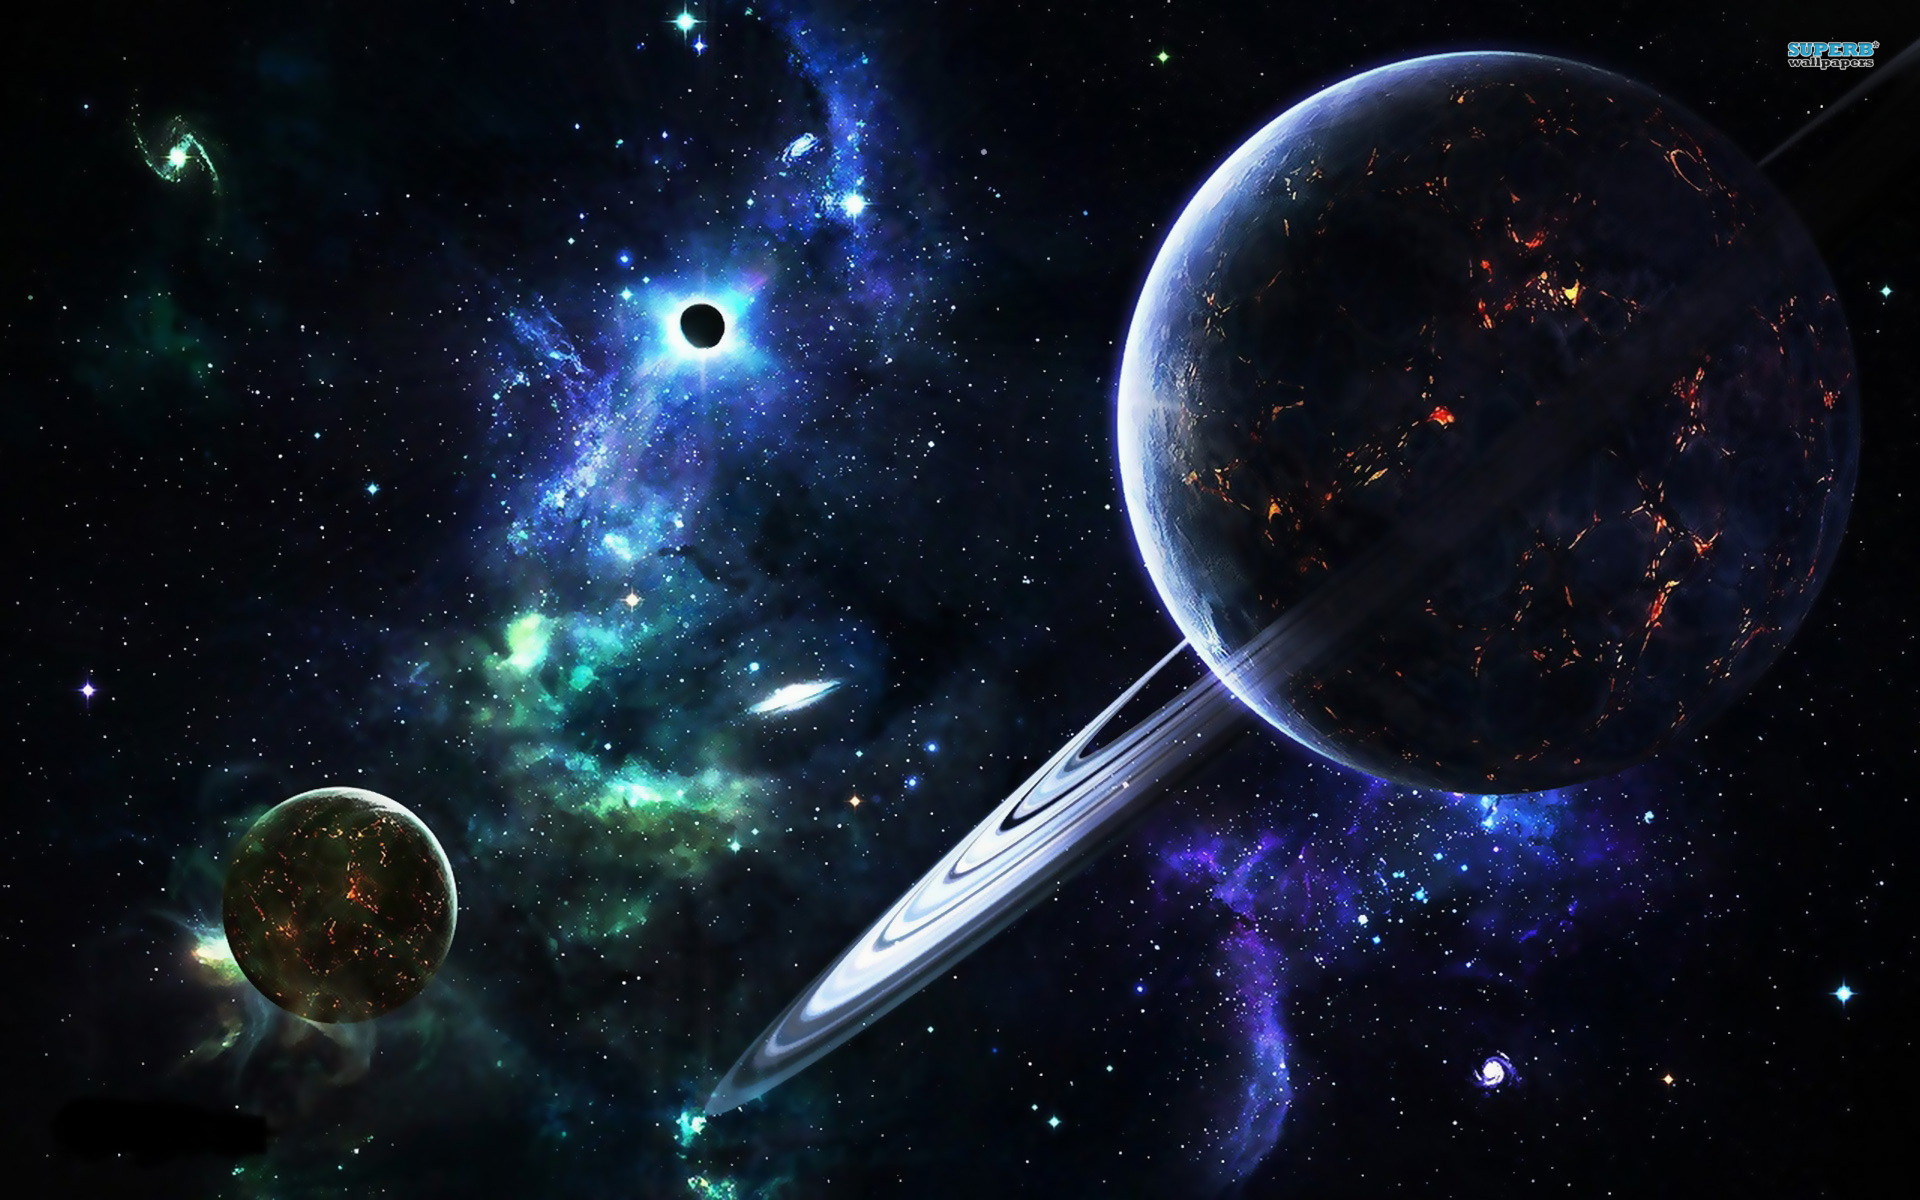 1920x1200 HD Wallpaper and background photos of Space Art Wallpaper for fans of Space  images.